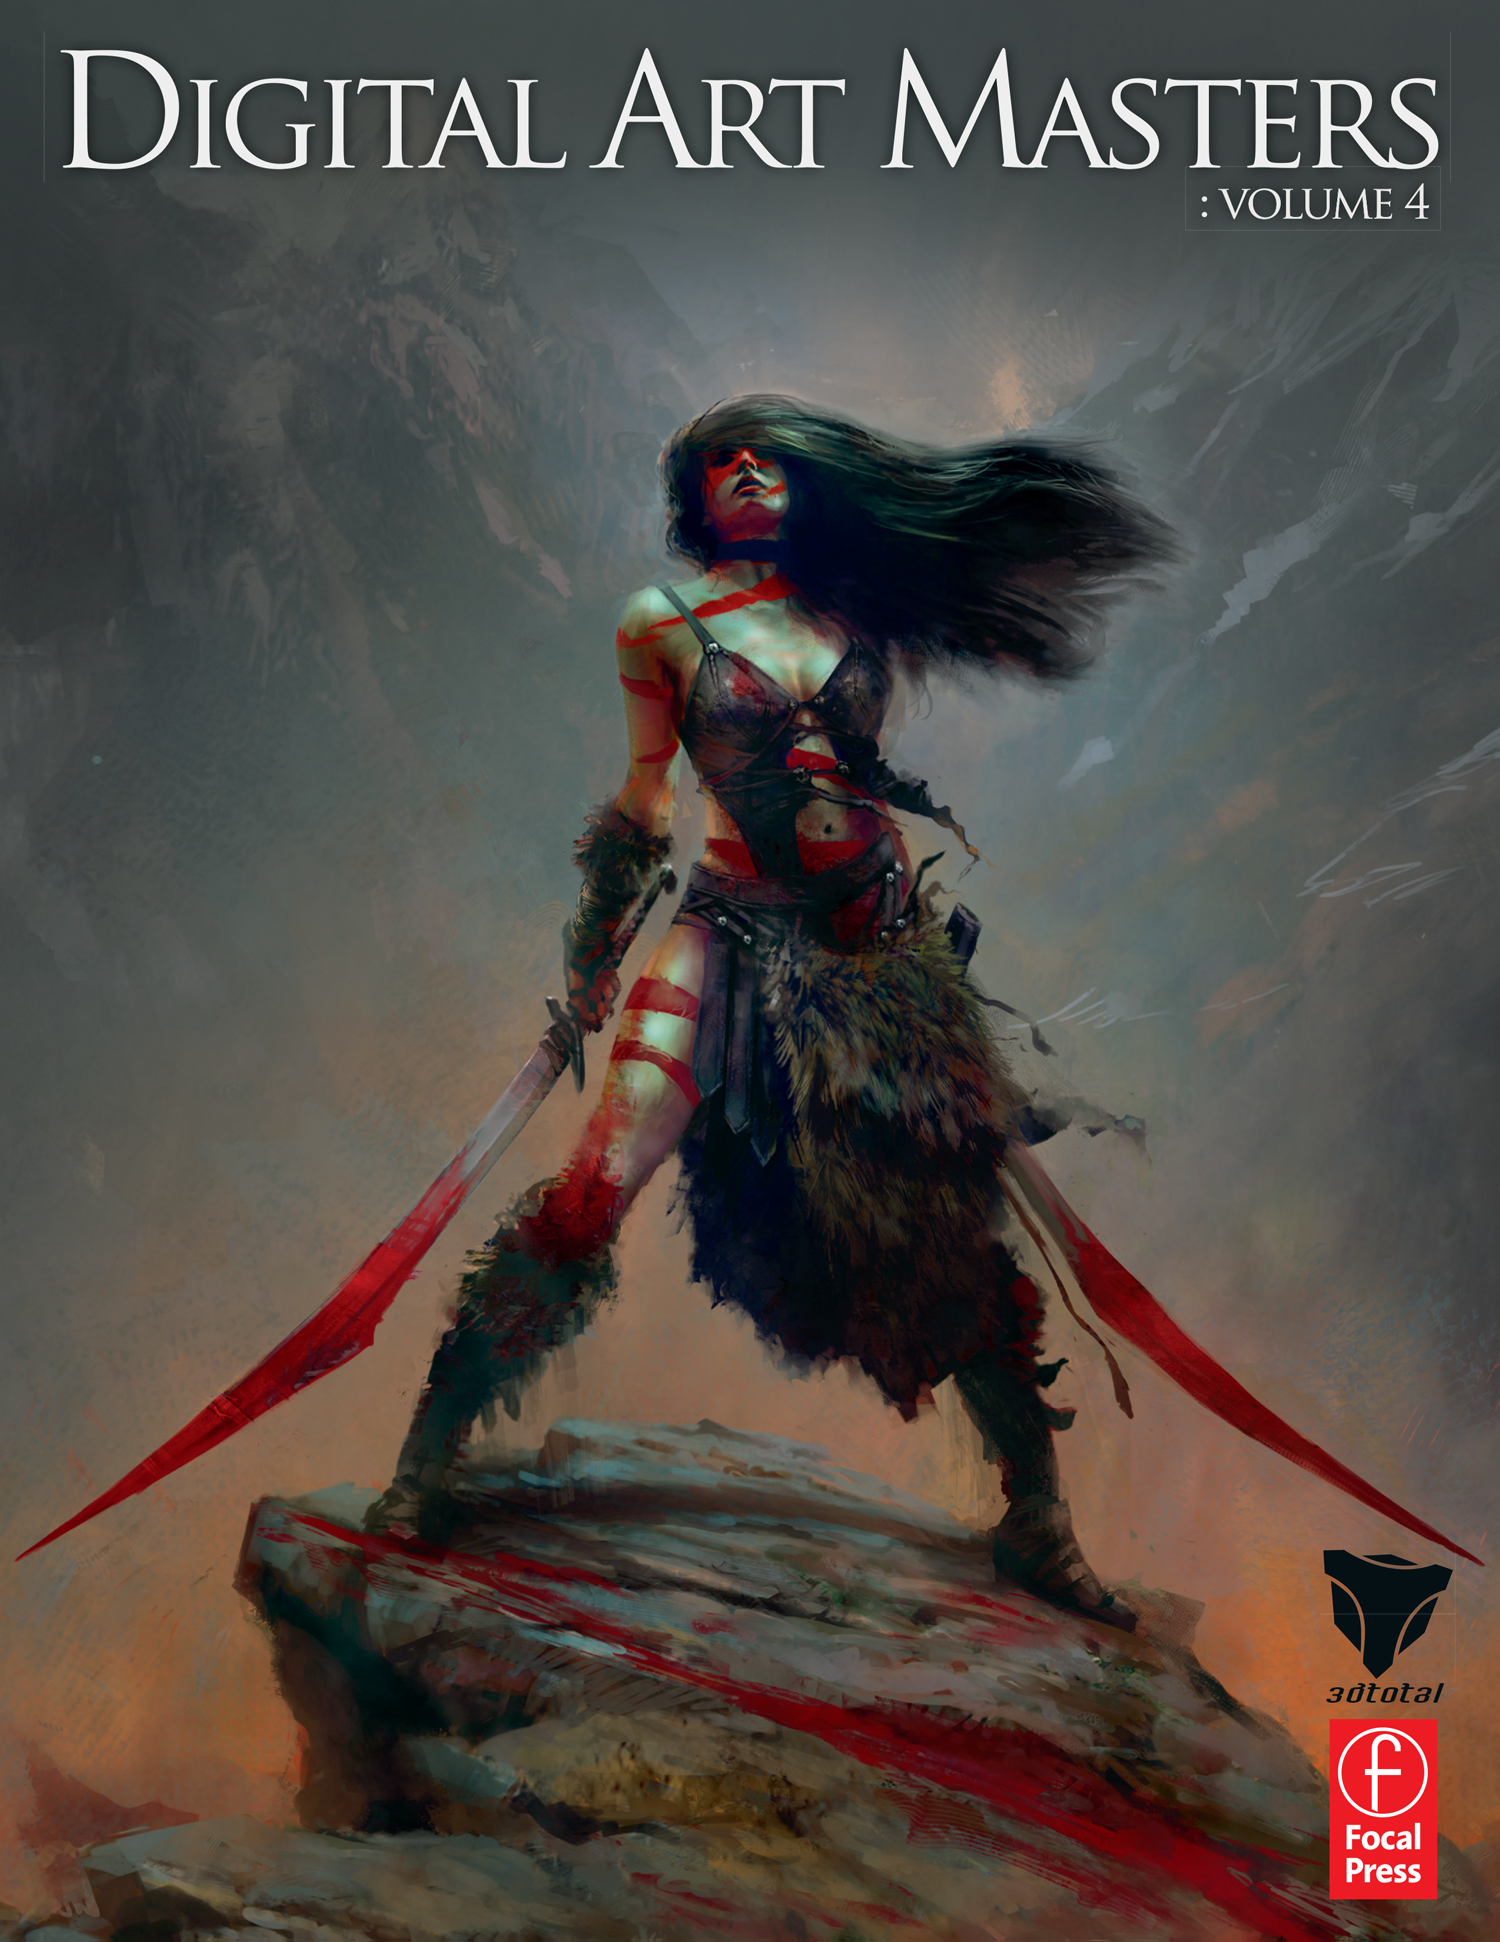 'Digital Art Masters: Volume 4' fantasy cover showing a female warrior covered in blood or red war paint, holding two swords.